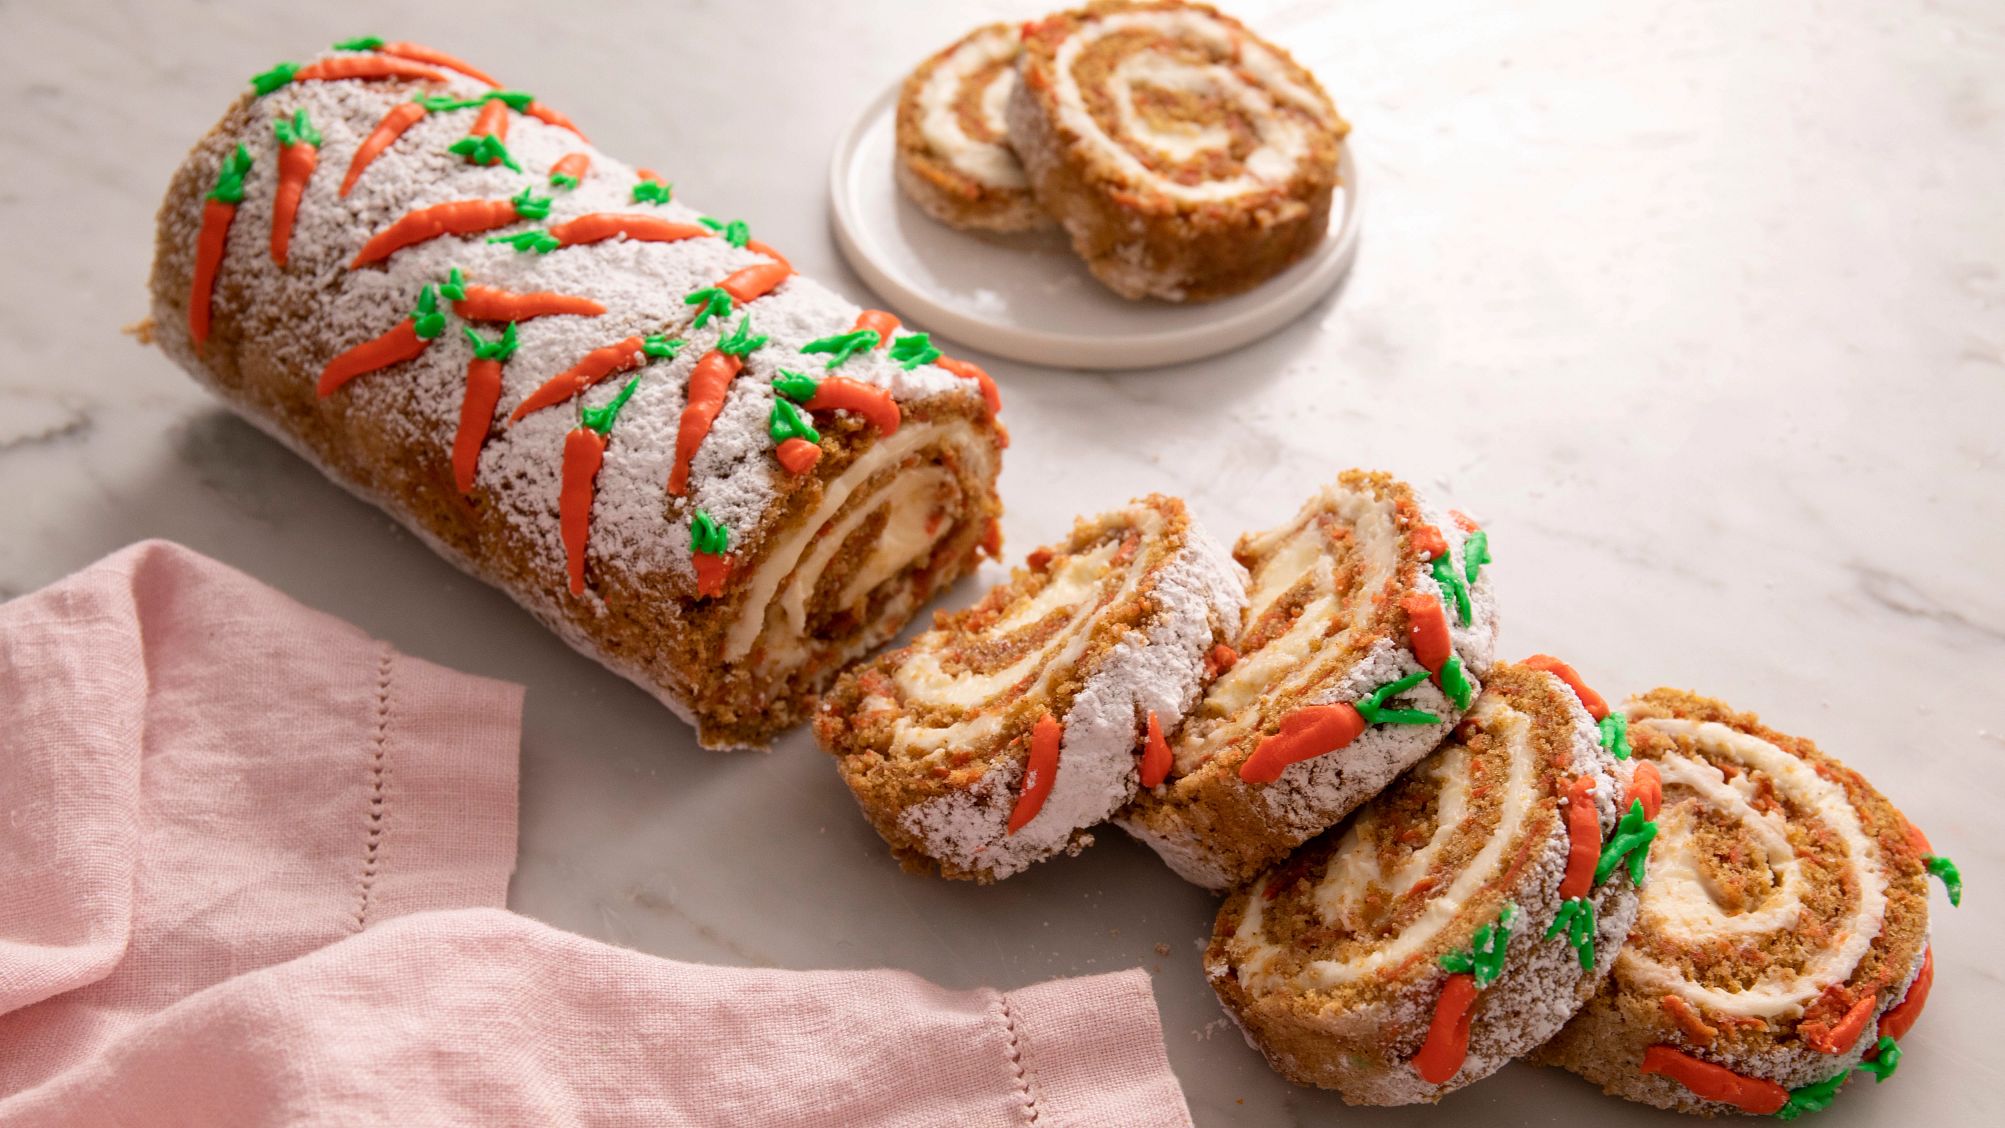 Carrot Cake Roll from McCormick